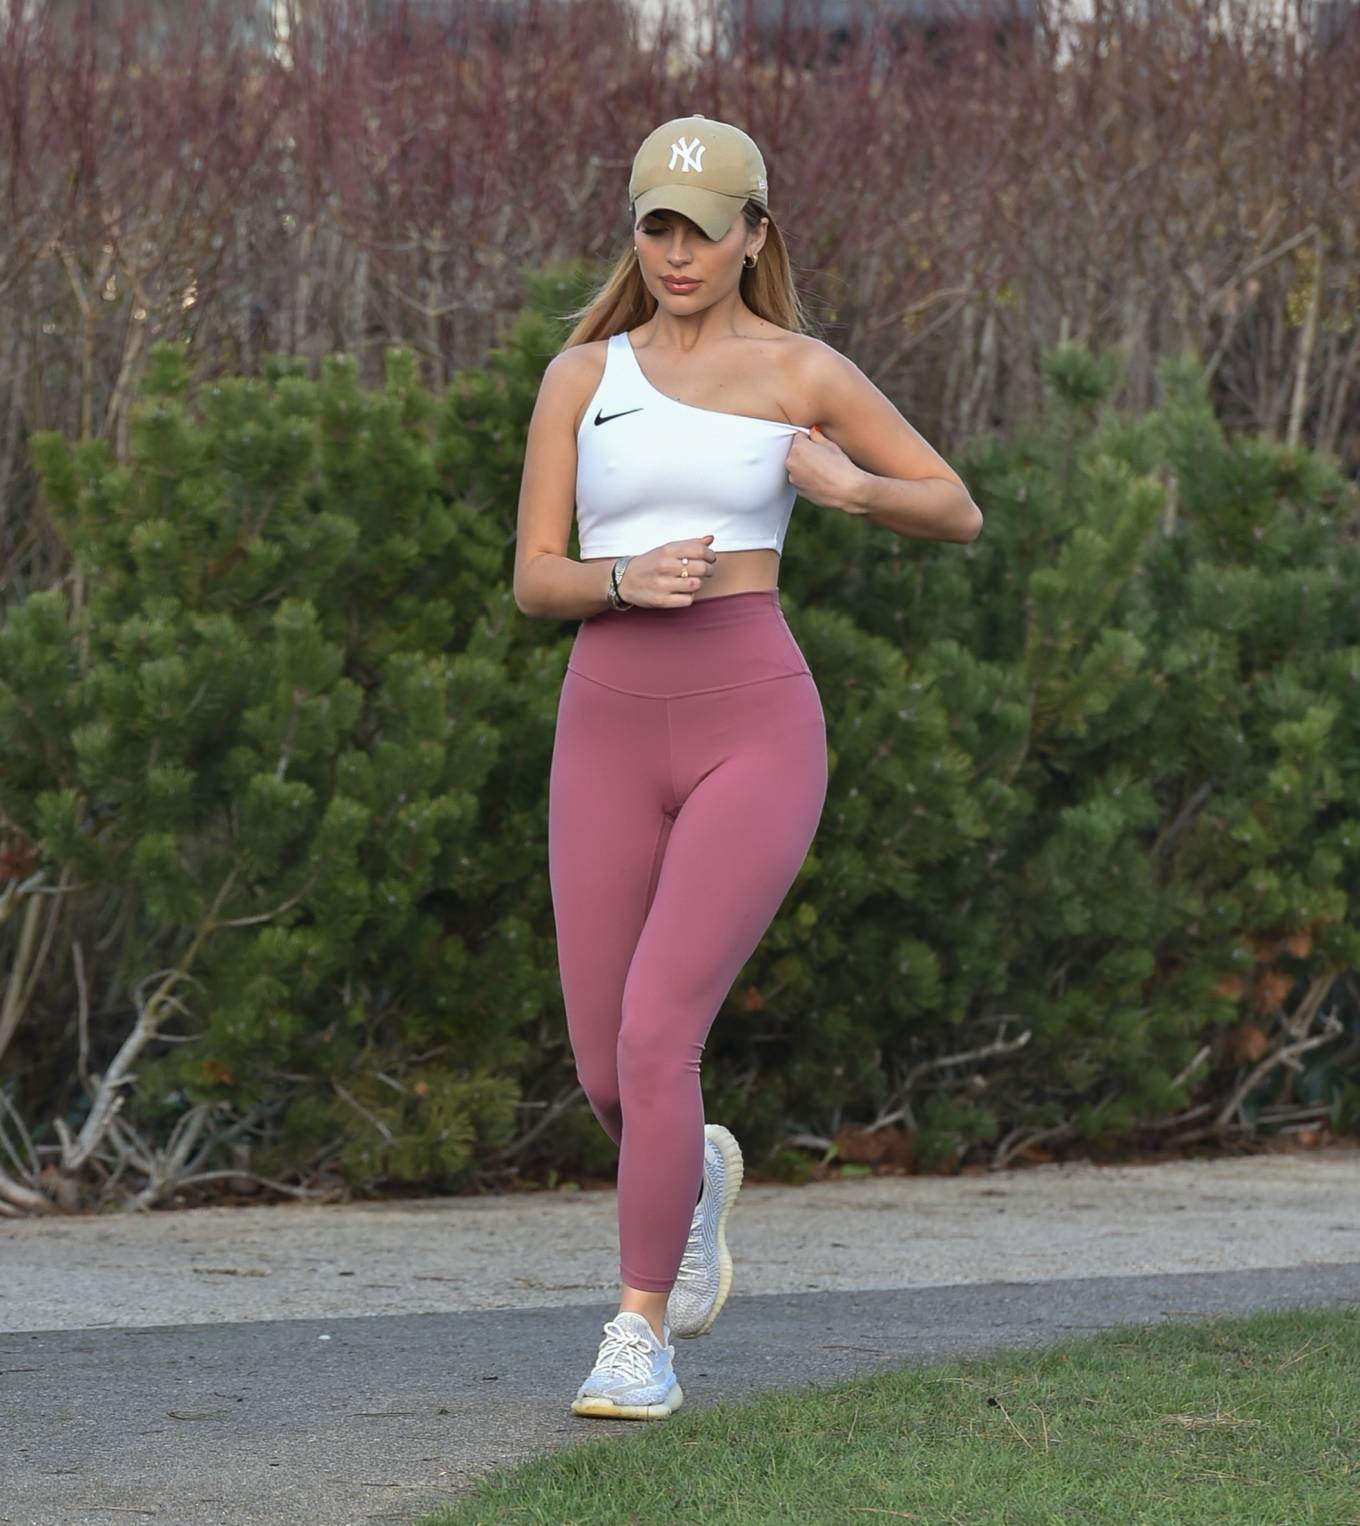 Maria Wild – Goes for a morning run in Chelsea